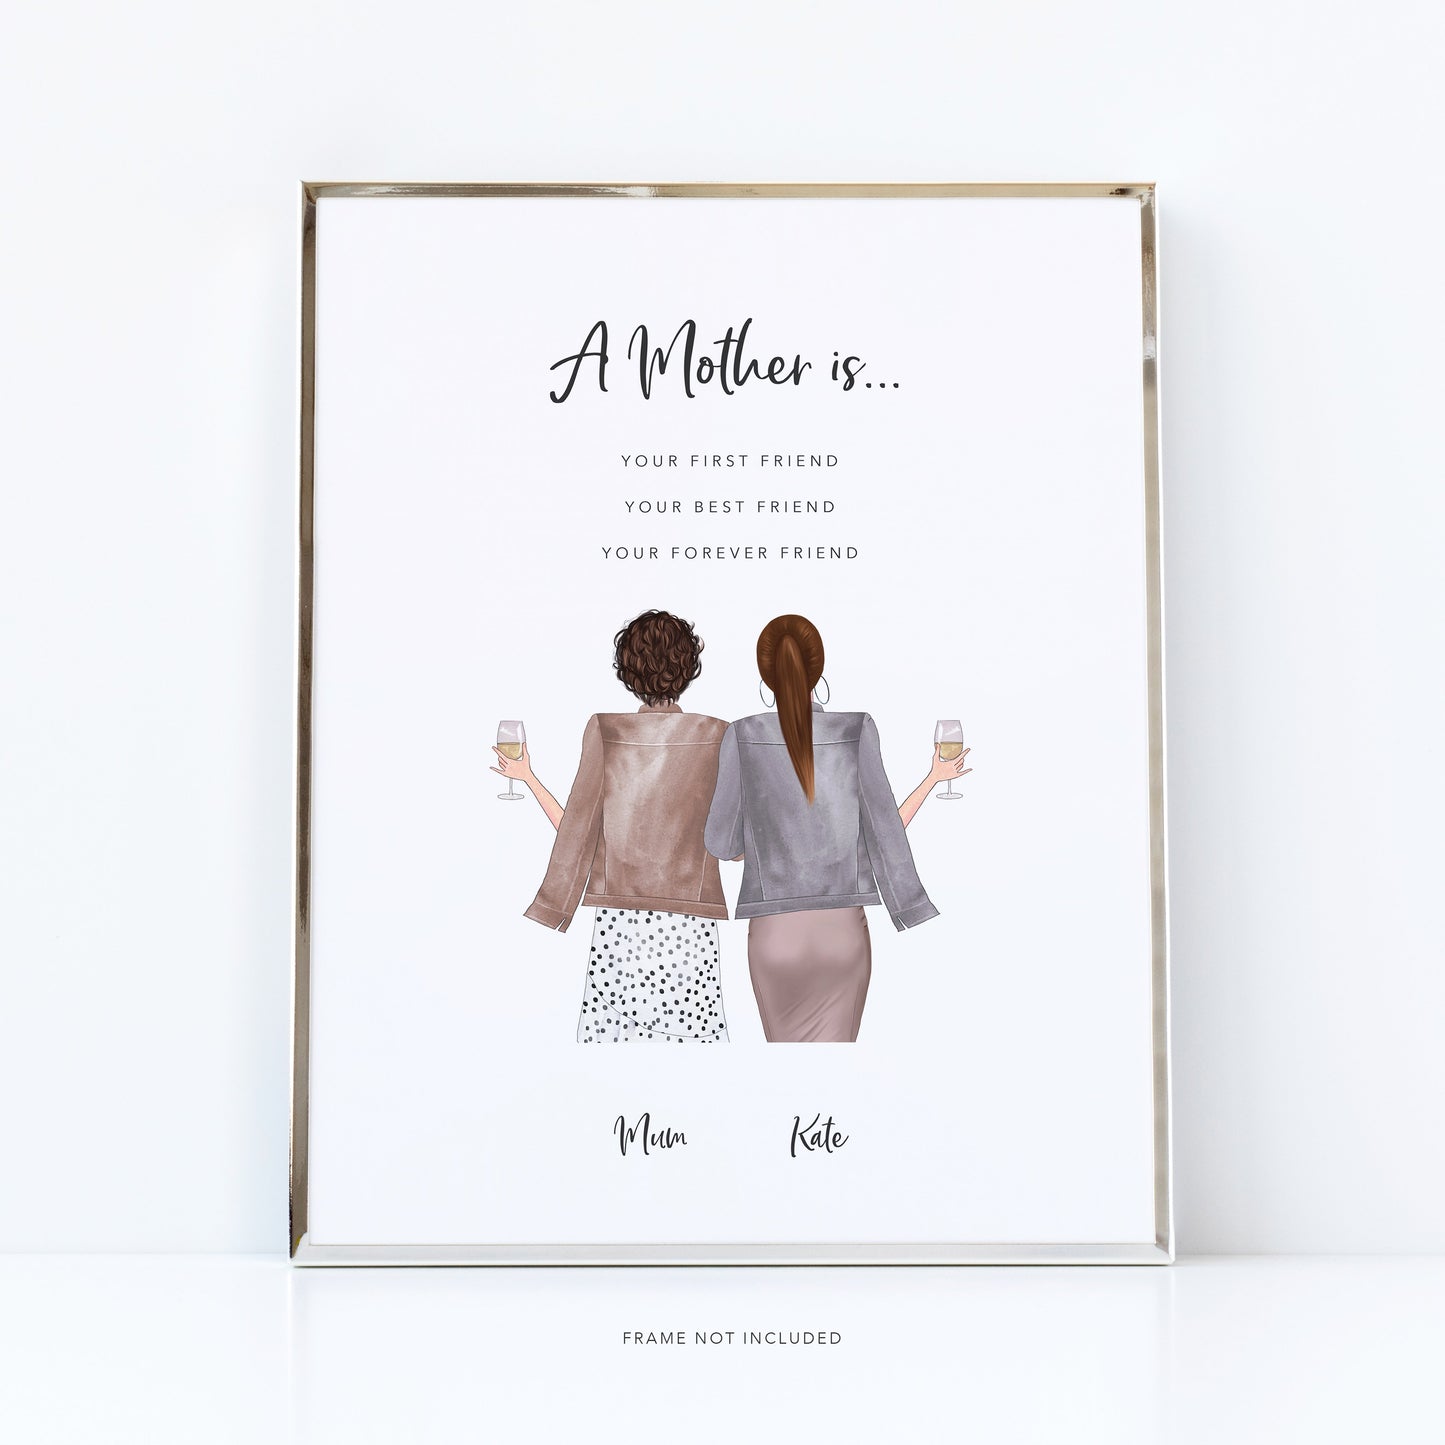 Personalised birthday card for mum | Customised print for your son